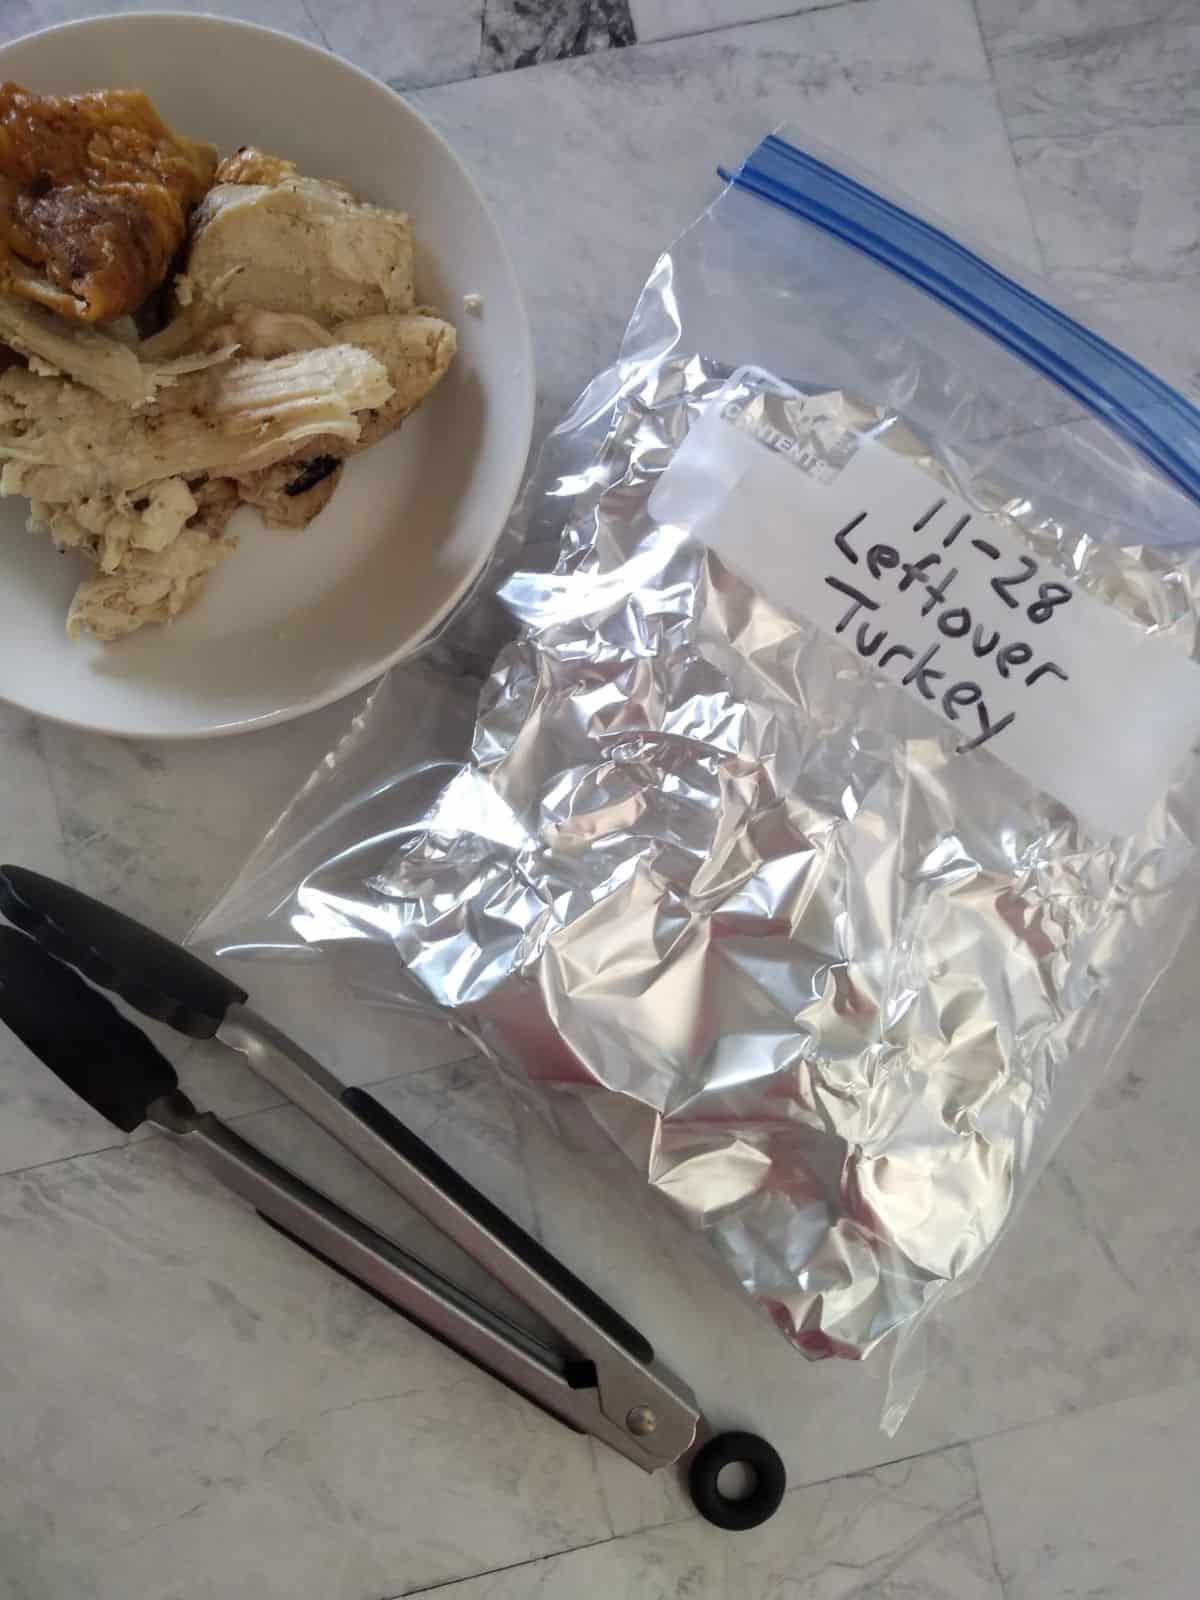 Leftover turkey that has been wrapped in foil that is put inside a plastic bag. A bowl of leftover turkey is next to the bag and a pair of tongs.